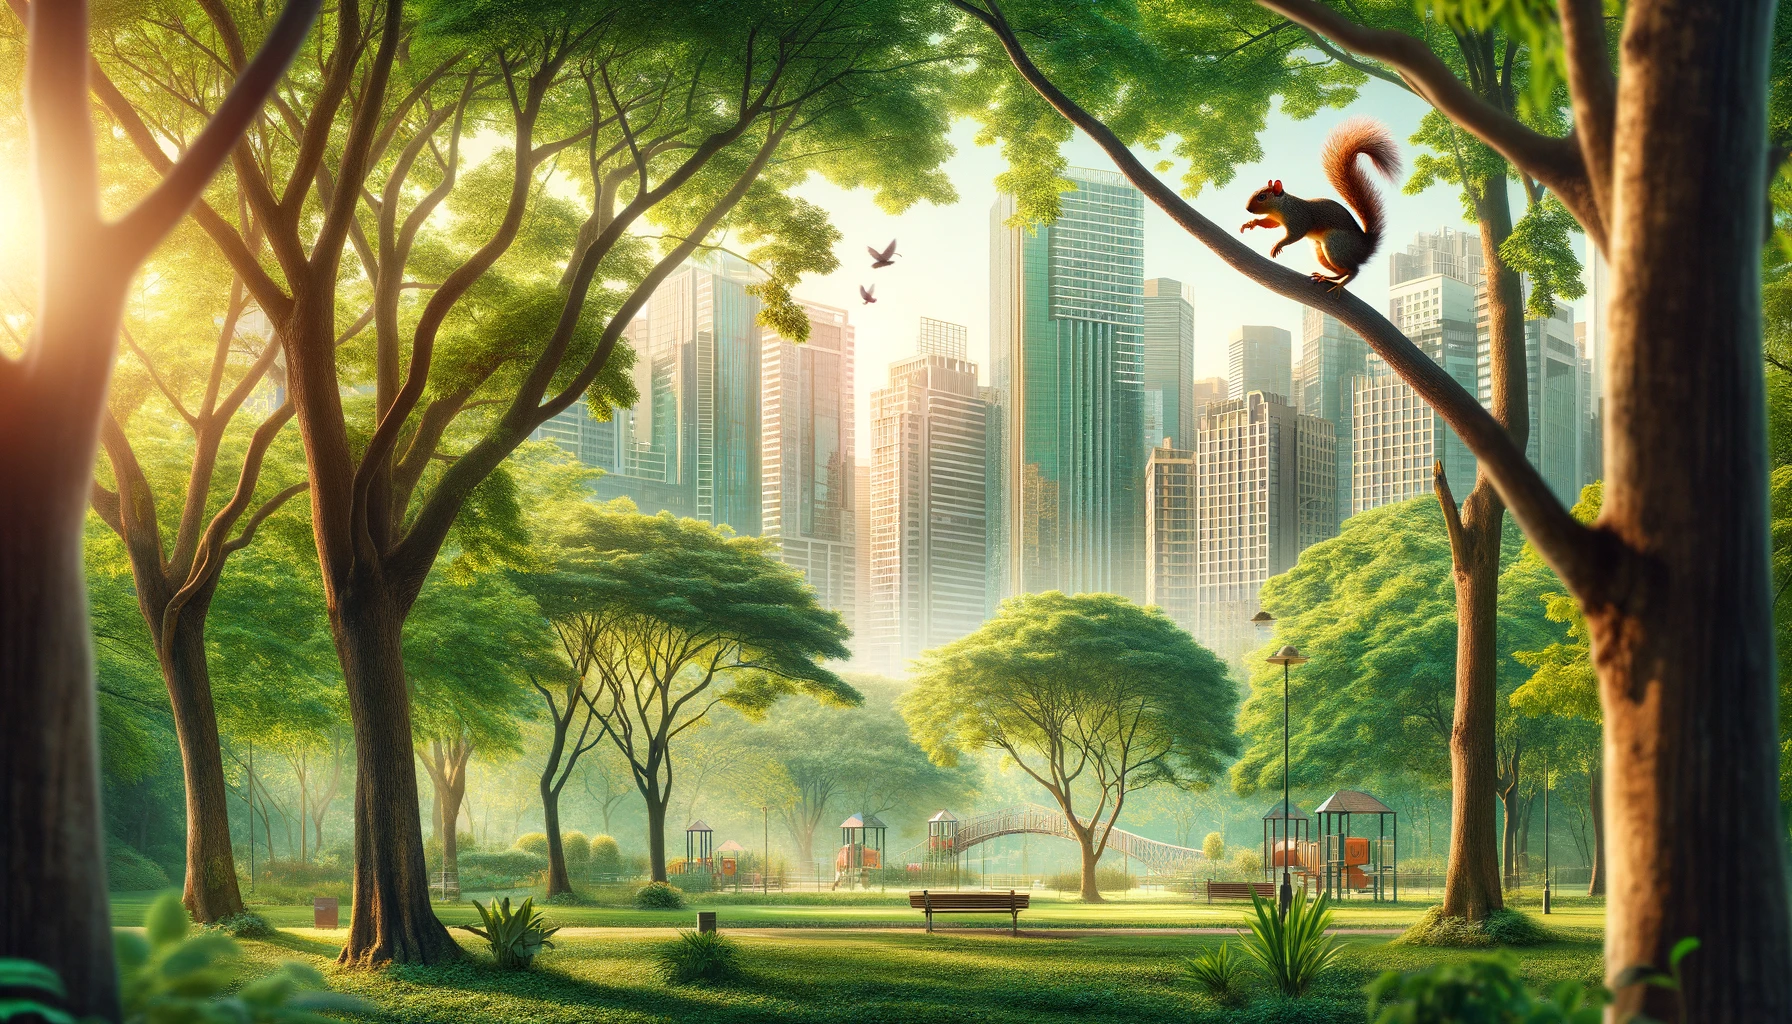 A realistic depiction of an urban park with vibrant greenery and tall buildings visible through the tree canopies. A small squirrel is seen leaping from branch to branch, adding life to the serene scene.